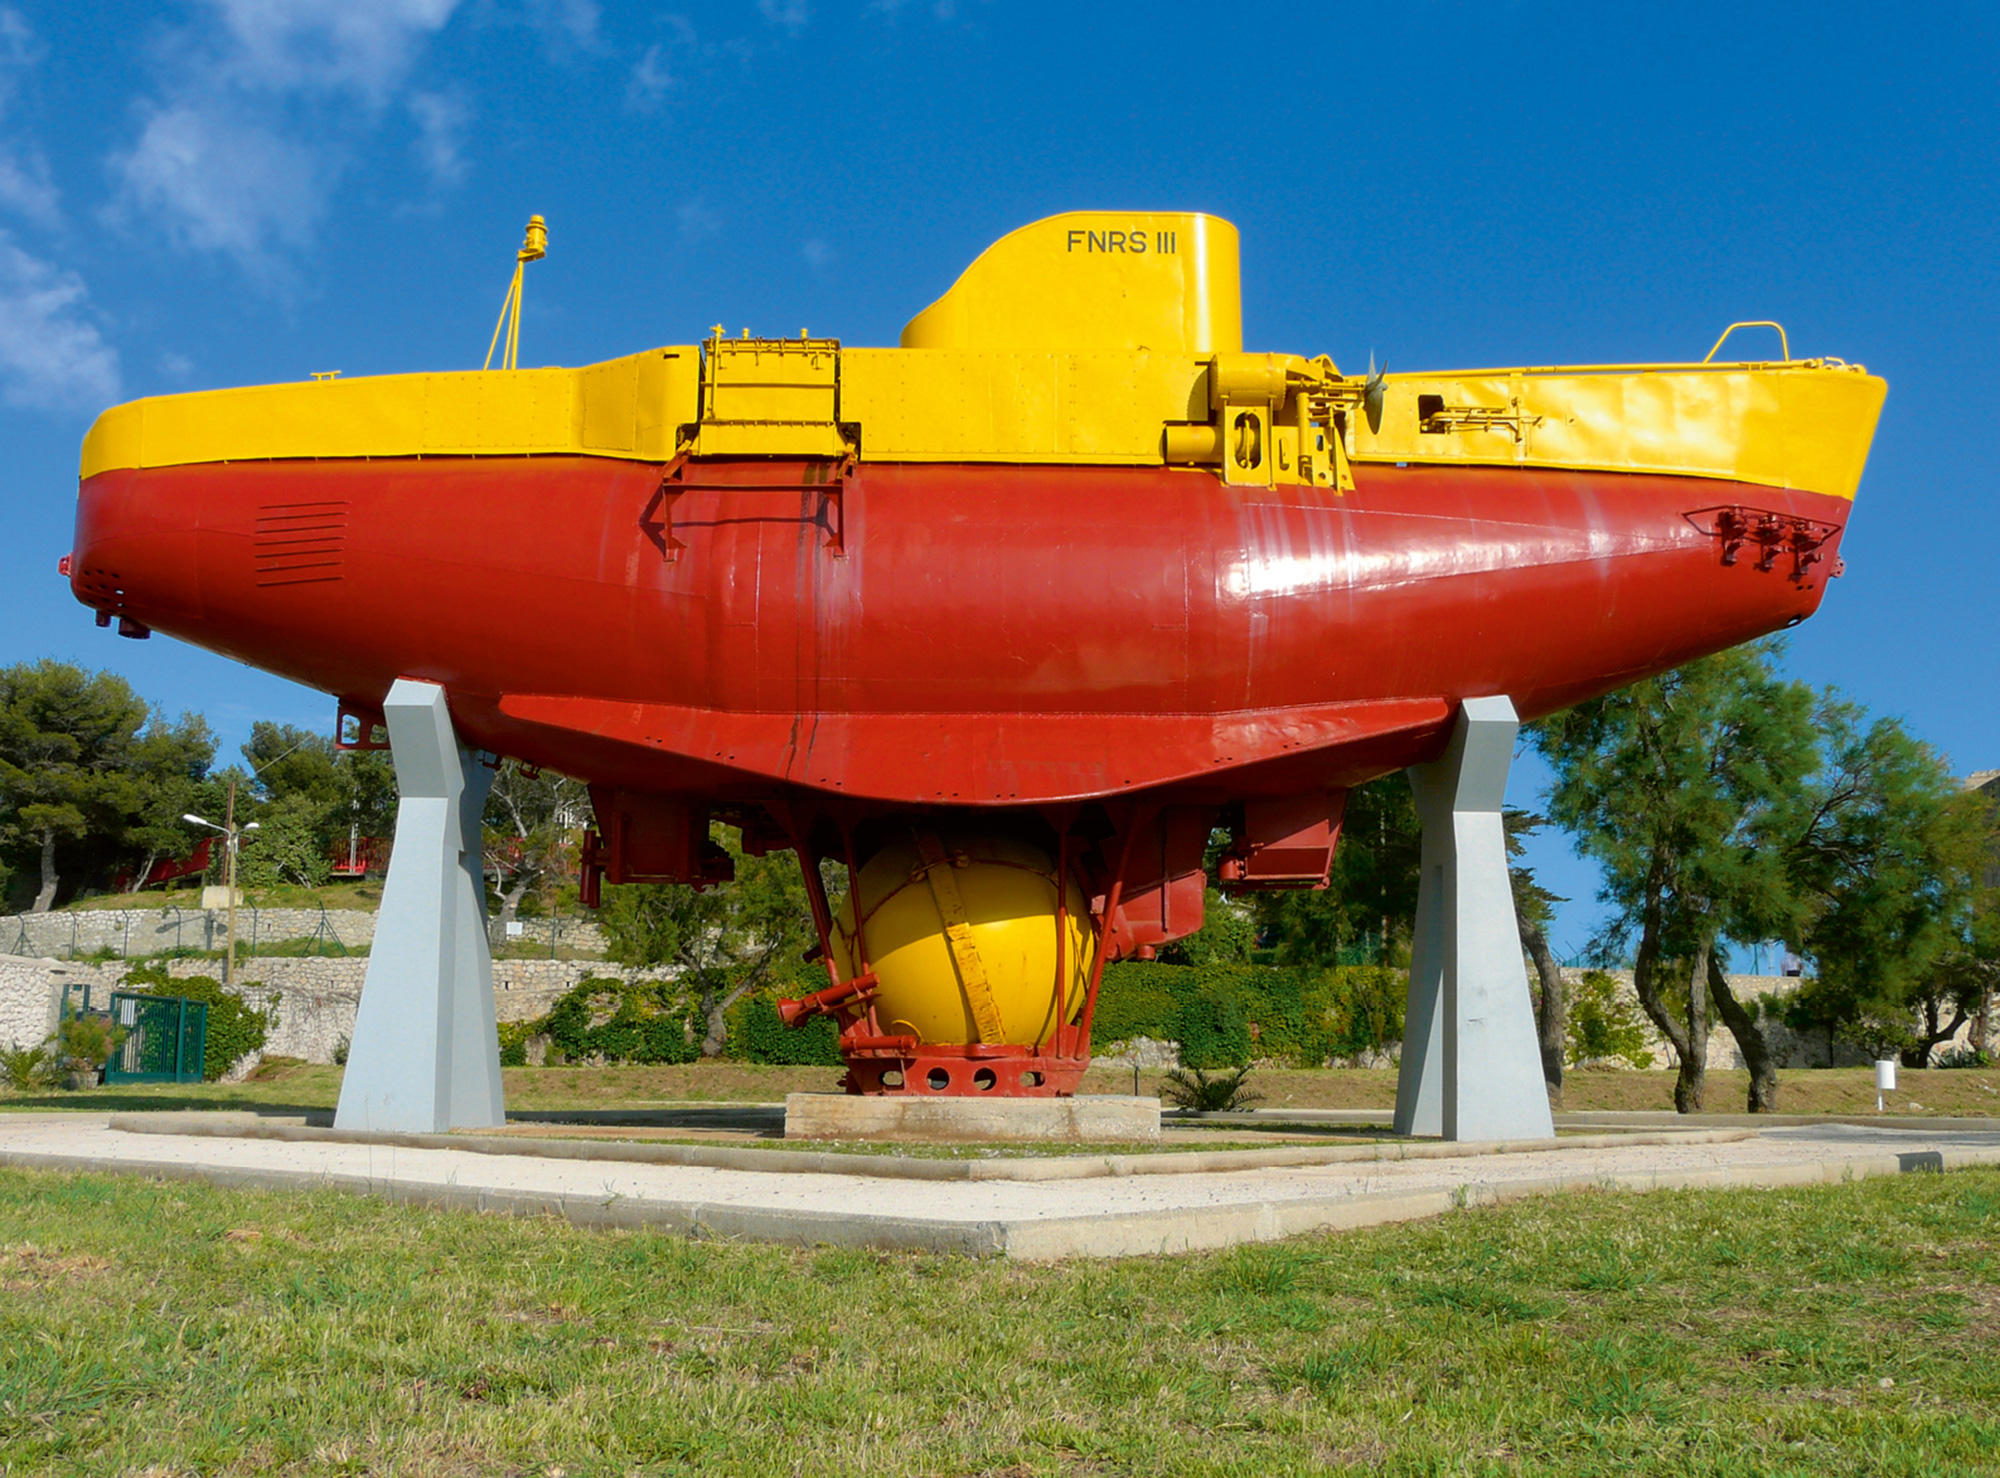 The French bathyscaphe FNRS 3, on display in Toulon. The vessel, based on a design by August Piccard, descended to a depth of 4,050 meters in nineteen fifty-four. Here it is seen painted red and yellow and propped on a boat stand. 